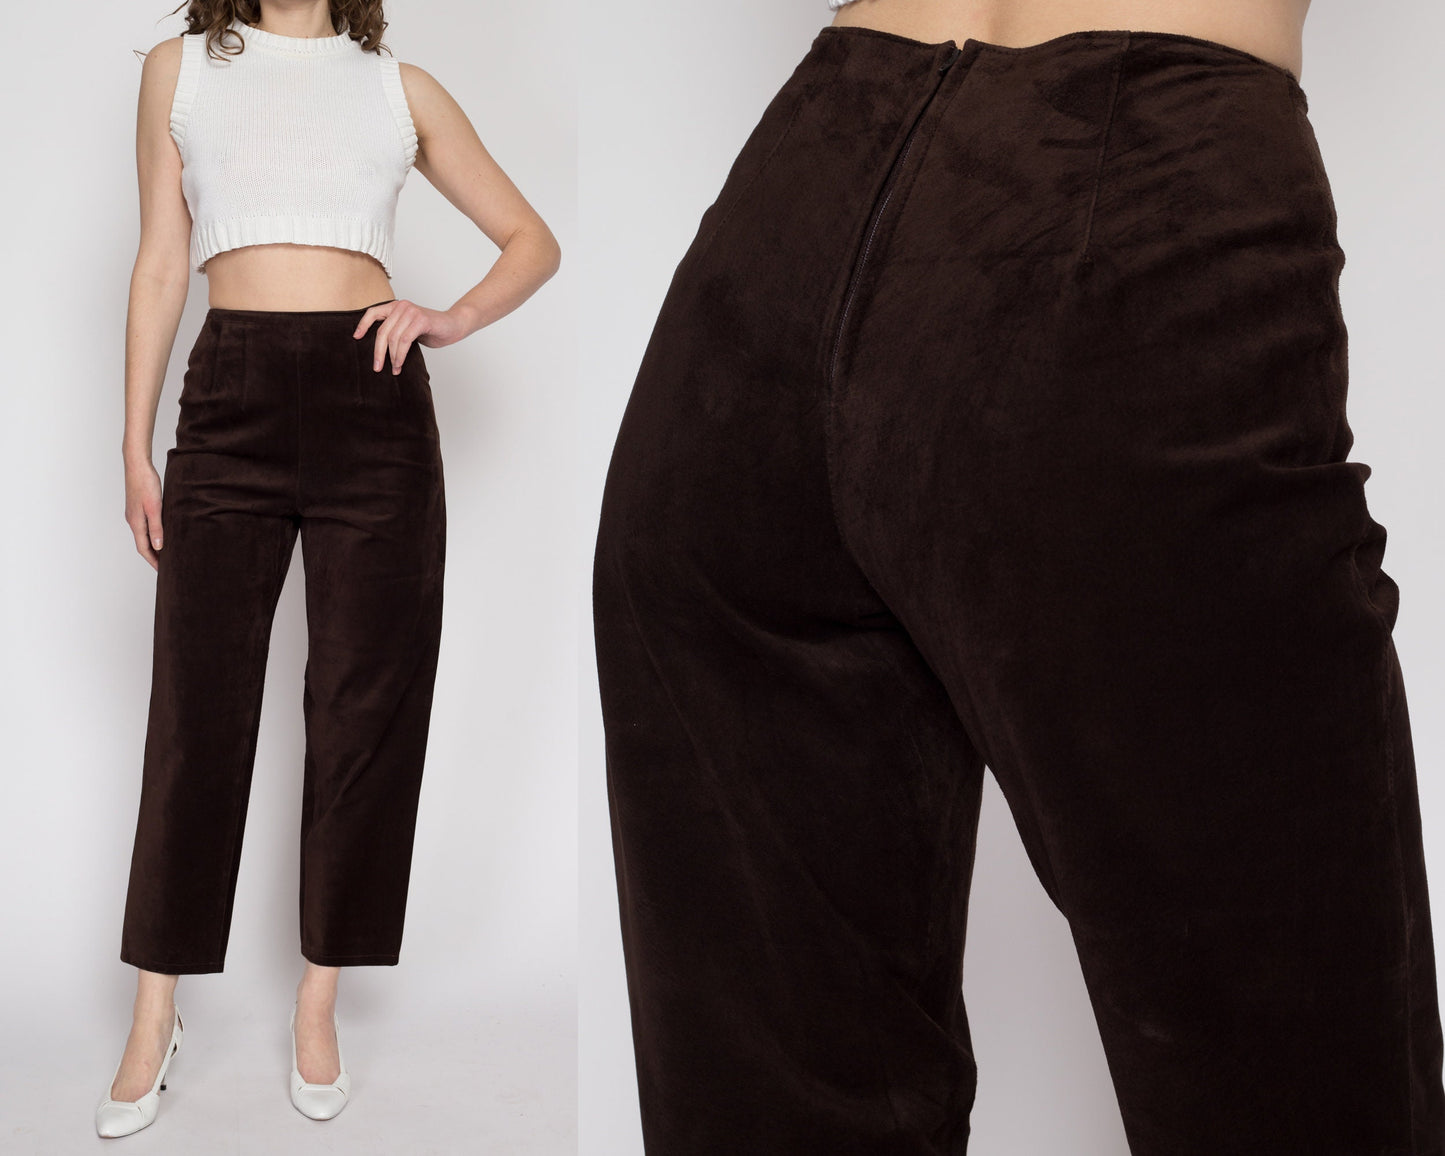 Small 90s Brown Suede High Waisted Trousers 26" | Vintage Ann Taylor Leather Tapered Leg Ankle Pants